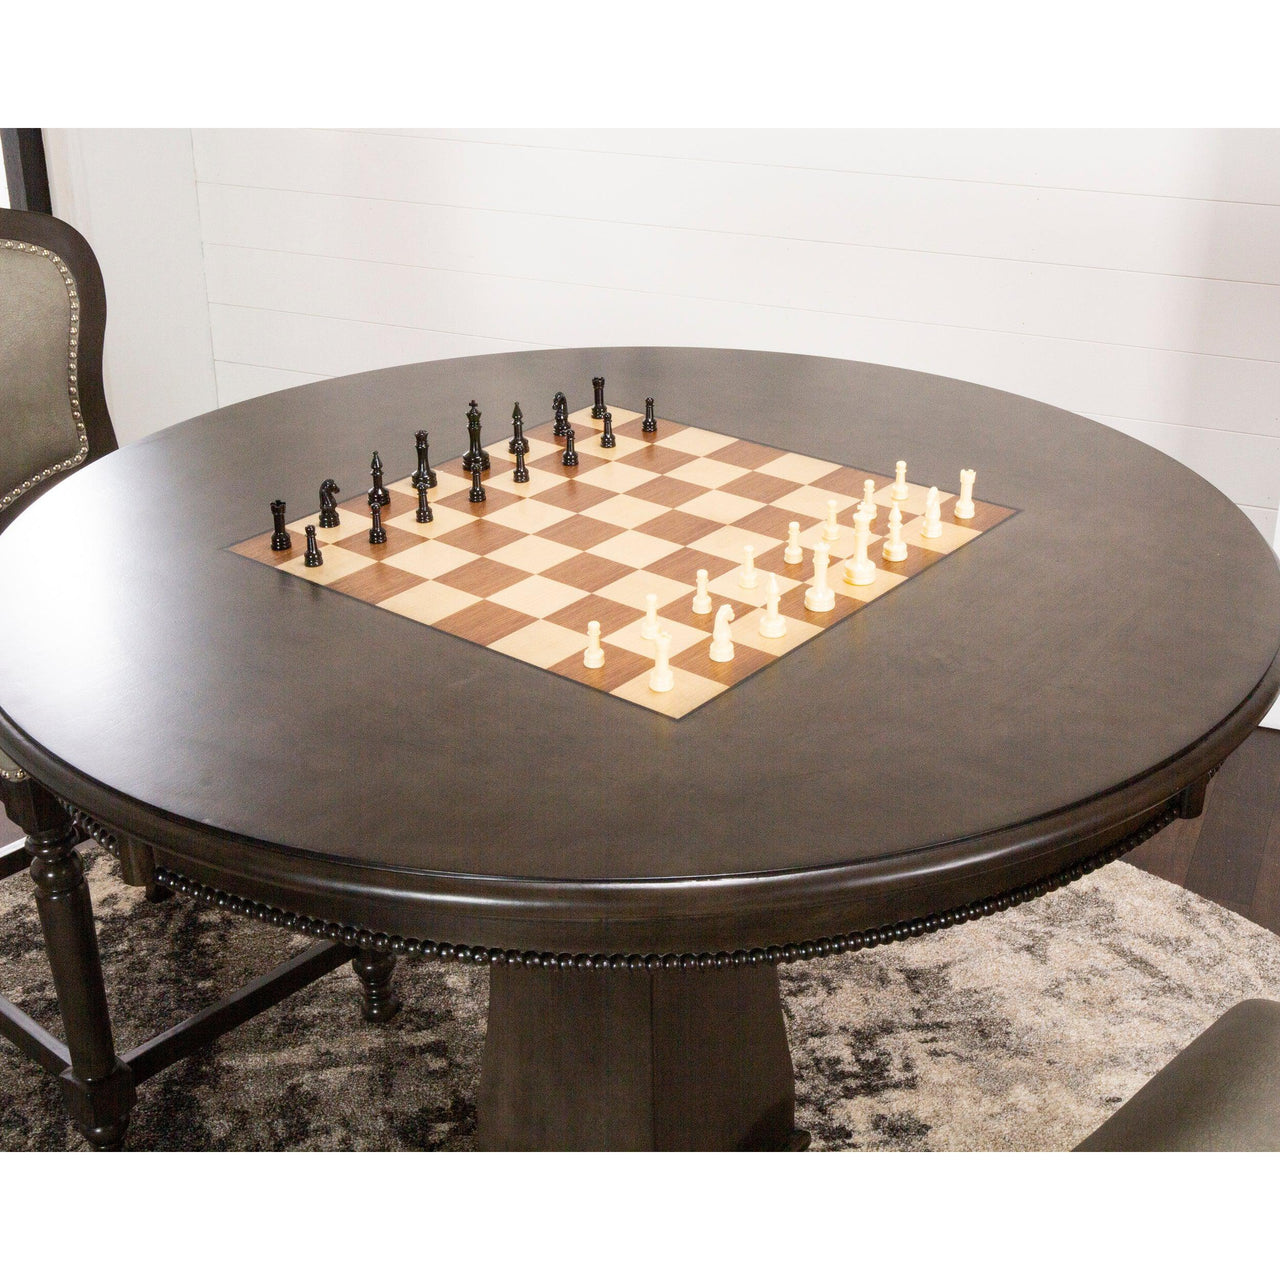 Convertible Round Counter Height Dining, Chess and Poker Table Set Vegas With 4 matching chairs-AMERICANA-POKER-TABLES